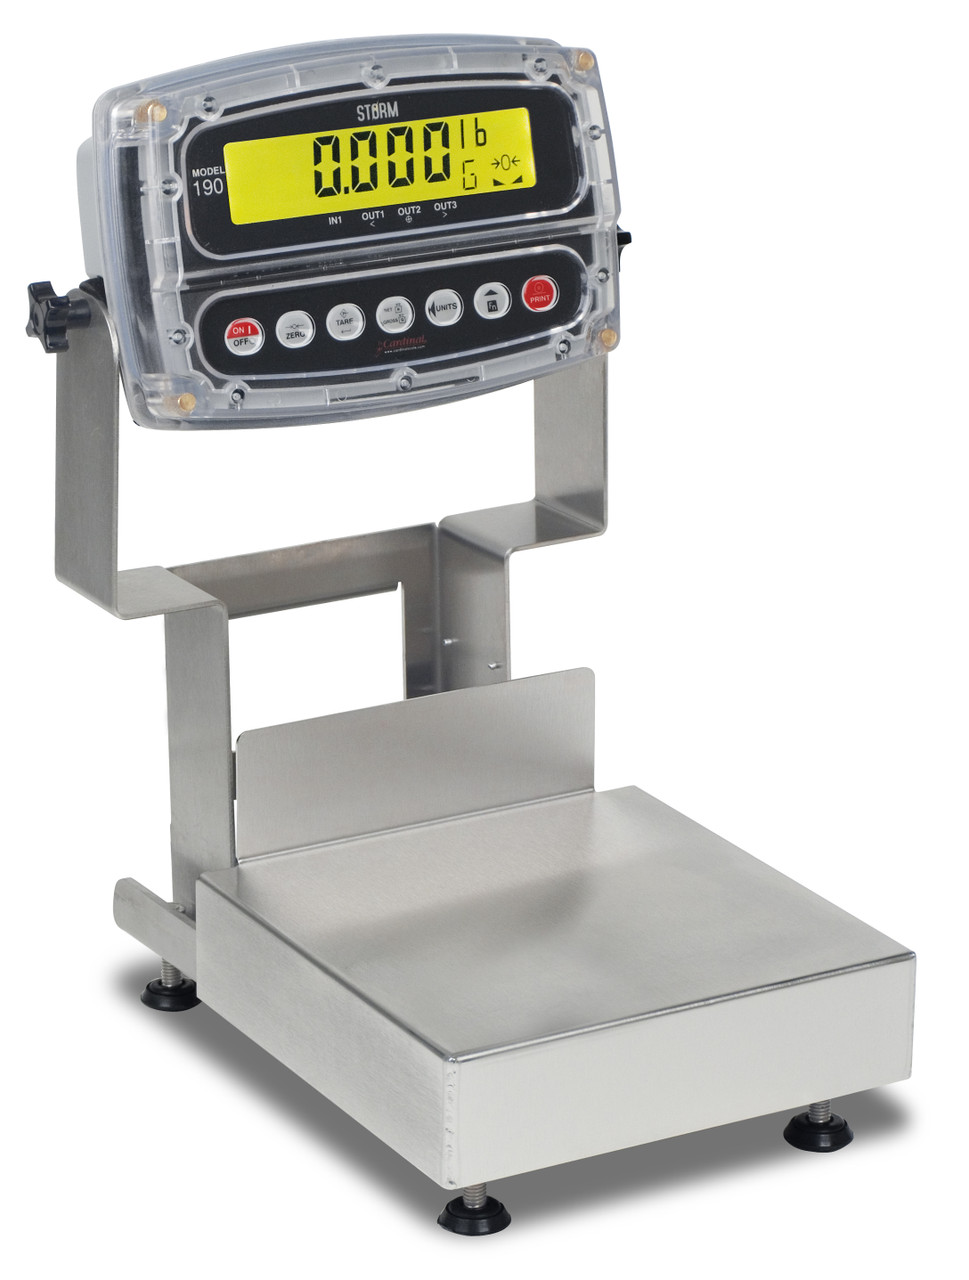 Cardinal Detecto 30 Lb Electronic Bench Scale 8" x 8" Stainless Steel Washdown 190 Indicator, Model# CA8-30W-190